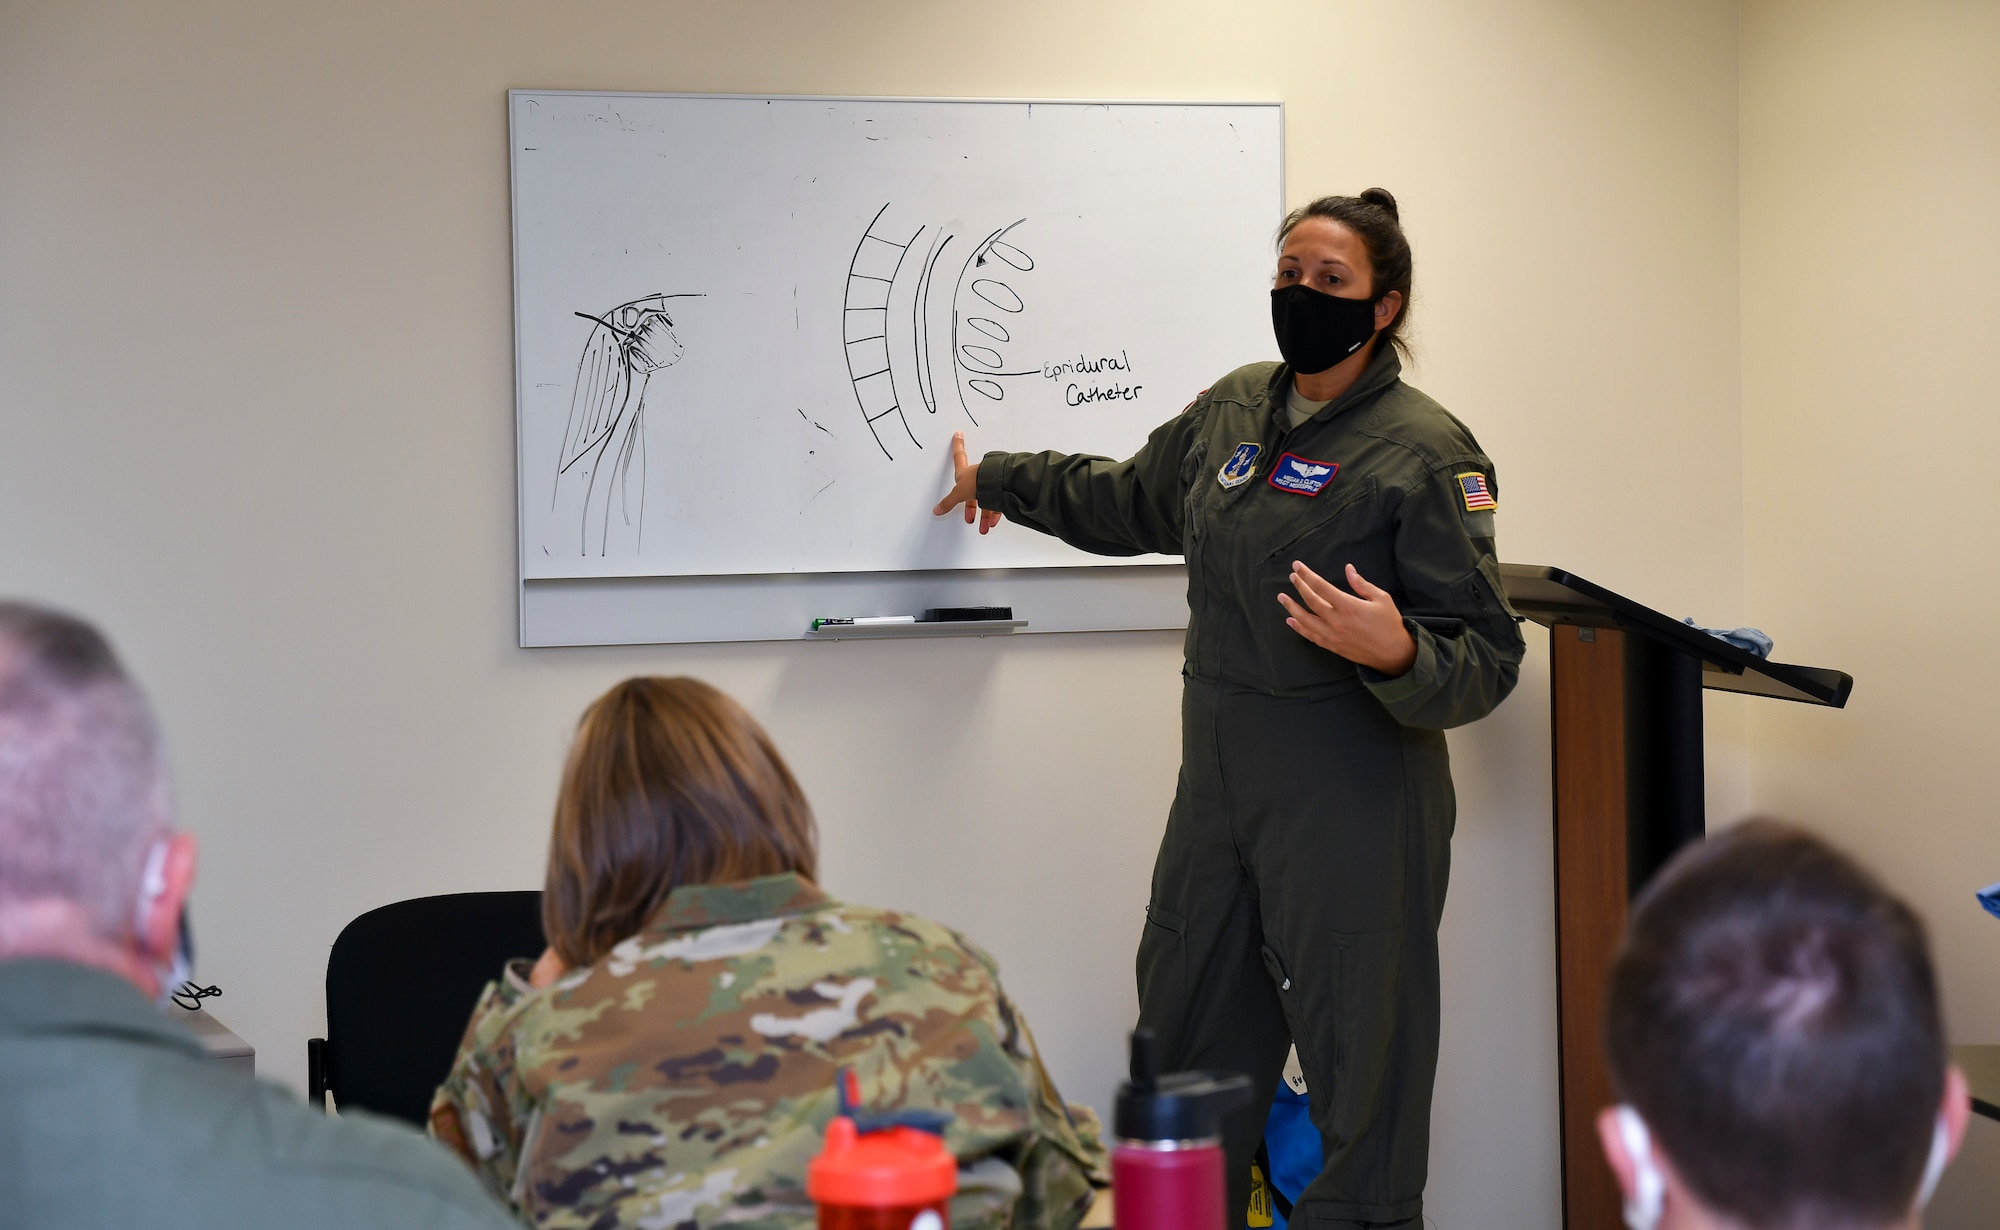 Master Sgt. Megan Clifton, an aeromedical evacuation technician assigned to the 183rd Aeromedical Evacuation Squadron, teaches a class on how to properly insert an epidural at Keesler Air Force Base in Biloxi, Mississippi, July 22, 2020. The 183rd AES participated in a variety of training that consisted of classroom lessons, simulated hospital patient care and simulated inflight patient care. (U.S. Air National Guard Photo by Maj. Reagan Lauritzen)